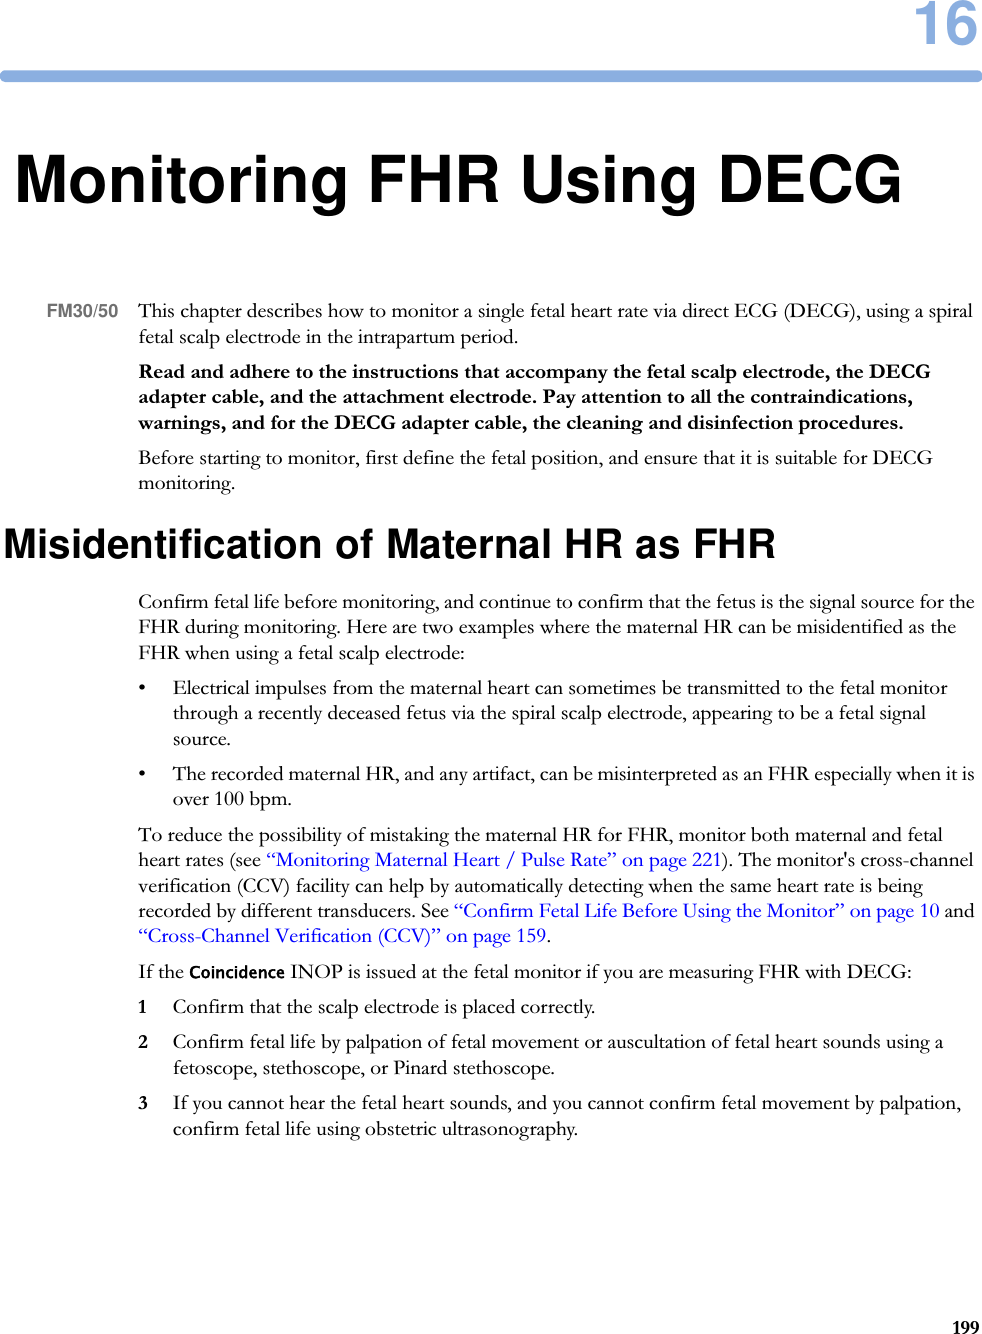 1619916Monitoring FHR Using DECGFM30/50 This chapter describes how to monitor a single fetal heart rate via direct ECG (DECG), using a spiral fetal scalp electrode in the intrapartum period.Read and adhere to the instructions that accompany the fetal scalp electrode, the DECG adapter cable, and the attachment electrode. Pay attention to all the contraindications, warnings, and for the DECG adapter cable, the cleaning and disinfection procedures.Before starting to monitor, first define the fetal position, and ensure that it is suitable for DECG monitoring.Misidentification of Maternal HR as FHRConfirm fetal life before monitoring, and continue to confirm that the fetus is the signal source for the FHR during monitoring. Here are two examples where the maternal HR can be misidentified as the FHR when using a fetal scalp electrode:• Electrical impulses from the maternal heart can sometimes be transmitted to the fetal monitor through a recently deceased fetus via the spiral scalp electrode, appearing to be a fetal signal source.• The recorded maternal HR, and any artifact, can be misinterpreted as an FHR especially when it is over 100 bpm.To reduce the possibility of mistaking the maternal HR for FHR, monitor both maternal and fetal heart rates (see “Monitoring Maternal Heart / Pulse Rate” on page 221). The monitor&apos;s cross-channel verification (CCV) facility can help by automatically detecting when the same heart rate is being recorded by different transducers. See “Confirm Fetal Life Before Using the Monitor” on page 10 and “Cross-Channel Verification (CCV)” on page 159.If the Coincidence INOP is issued at the fetal monitor if you are measuring FHR with DECG:1Confirm that the scalp electrode is placed correctly.2Confirm fetal life by palpation of fetal movement or auscultation of fetal heart sounds using a fetoscope, stethoscope, or Pinard stethoscope.3If you cannot hear the fetal heart sounds, and you cannot confirm fetal movement by palpation, confirm fetal life using obstetric ultrasonography.